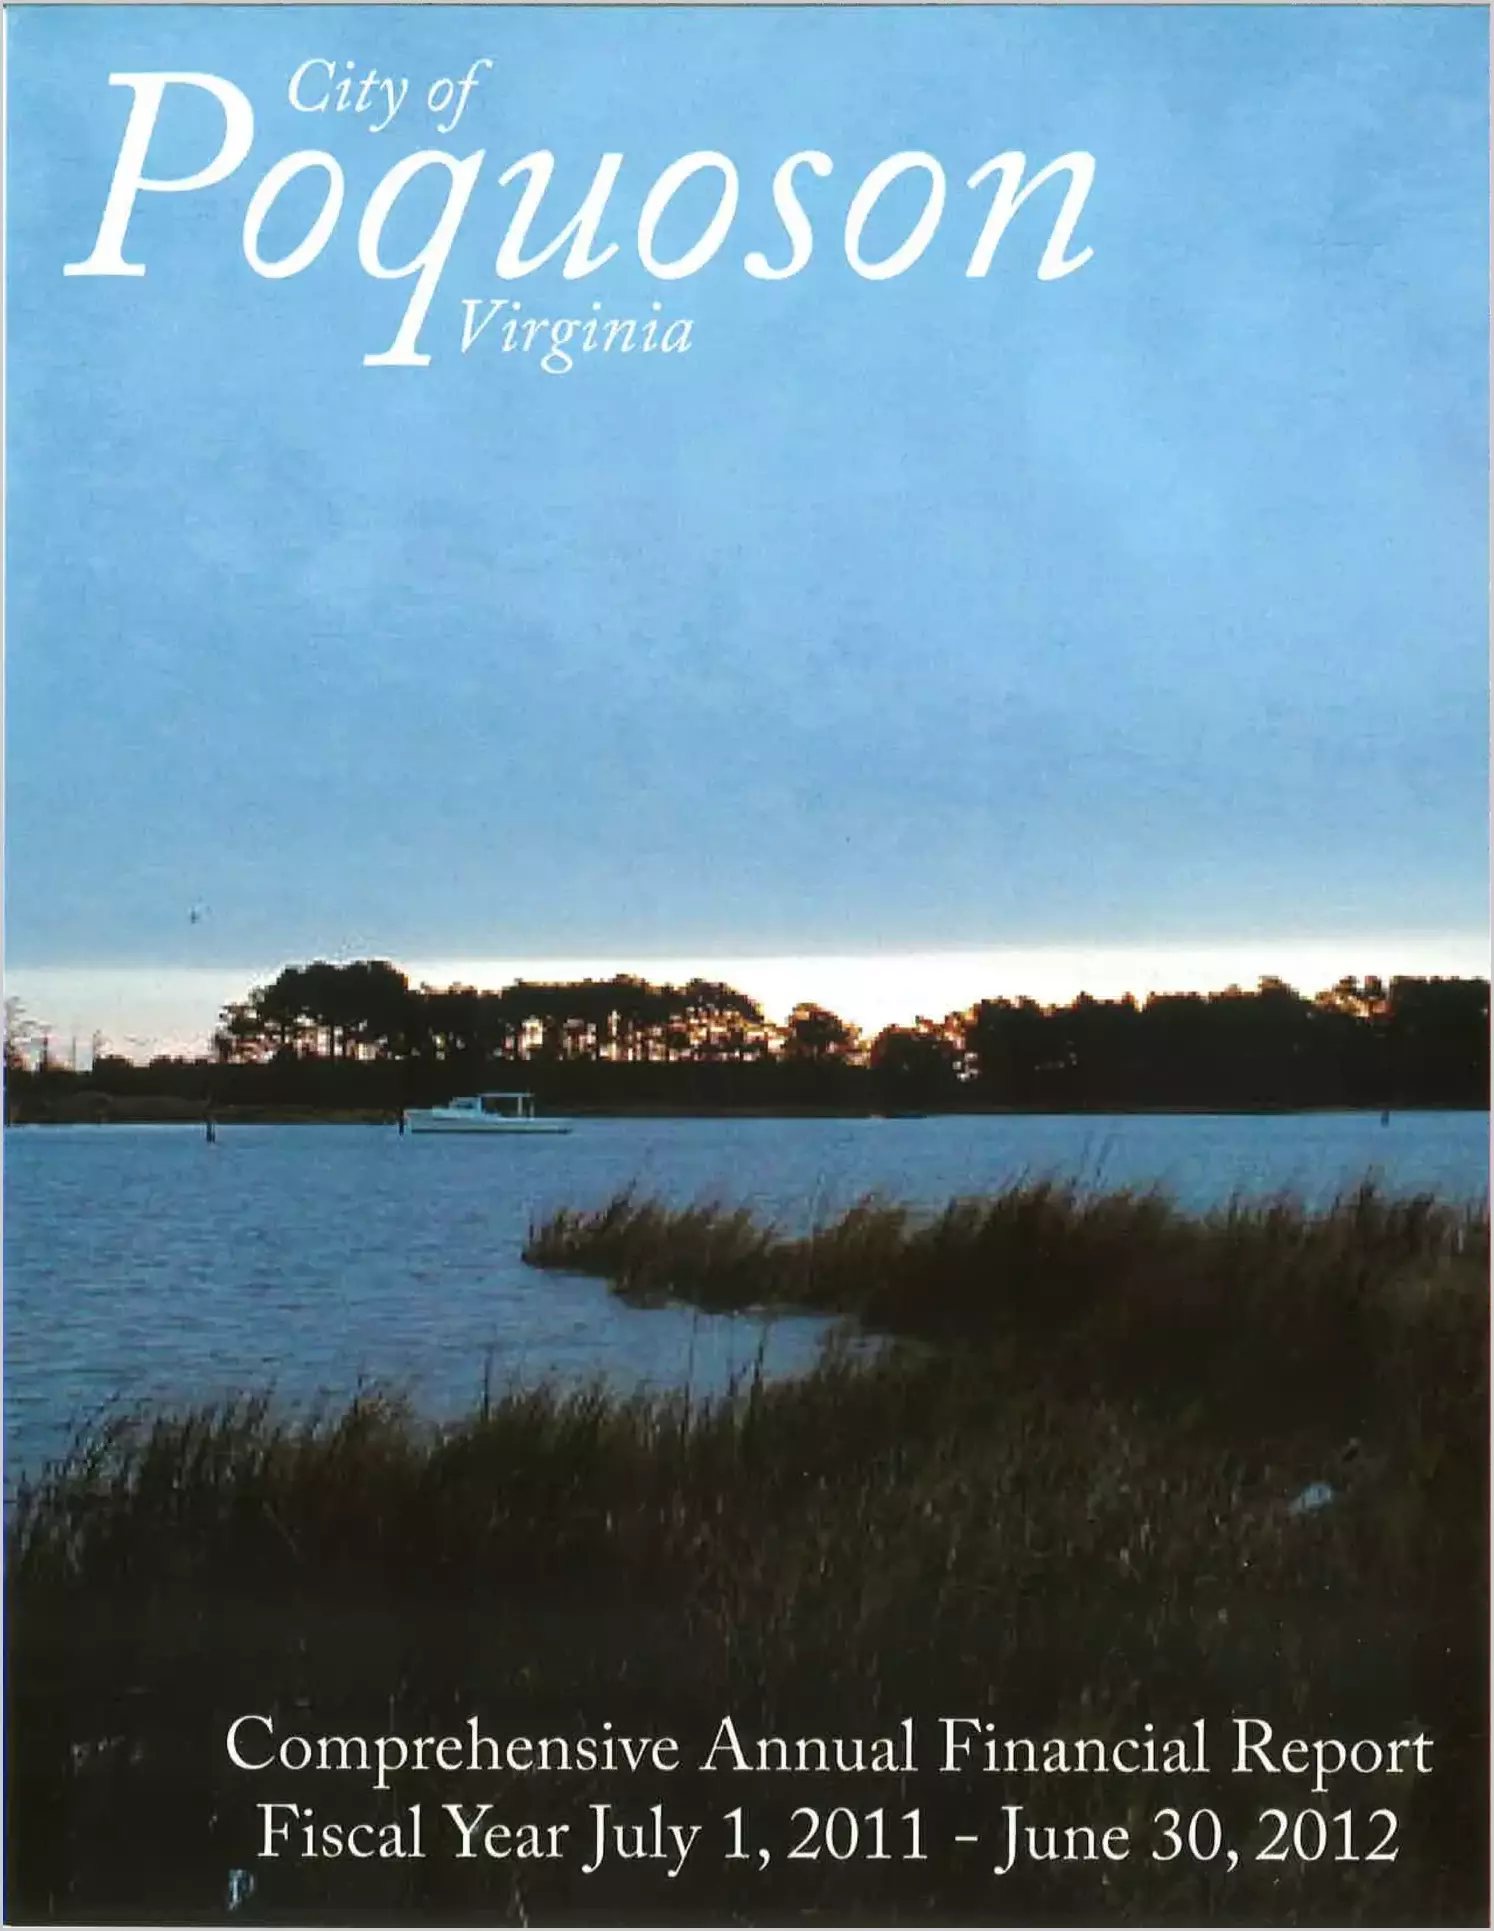 2012 Annual Financial Report for City of Poquoson